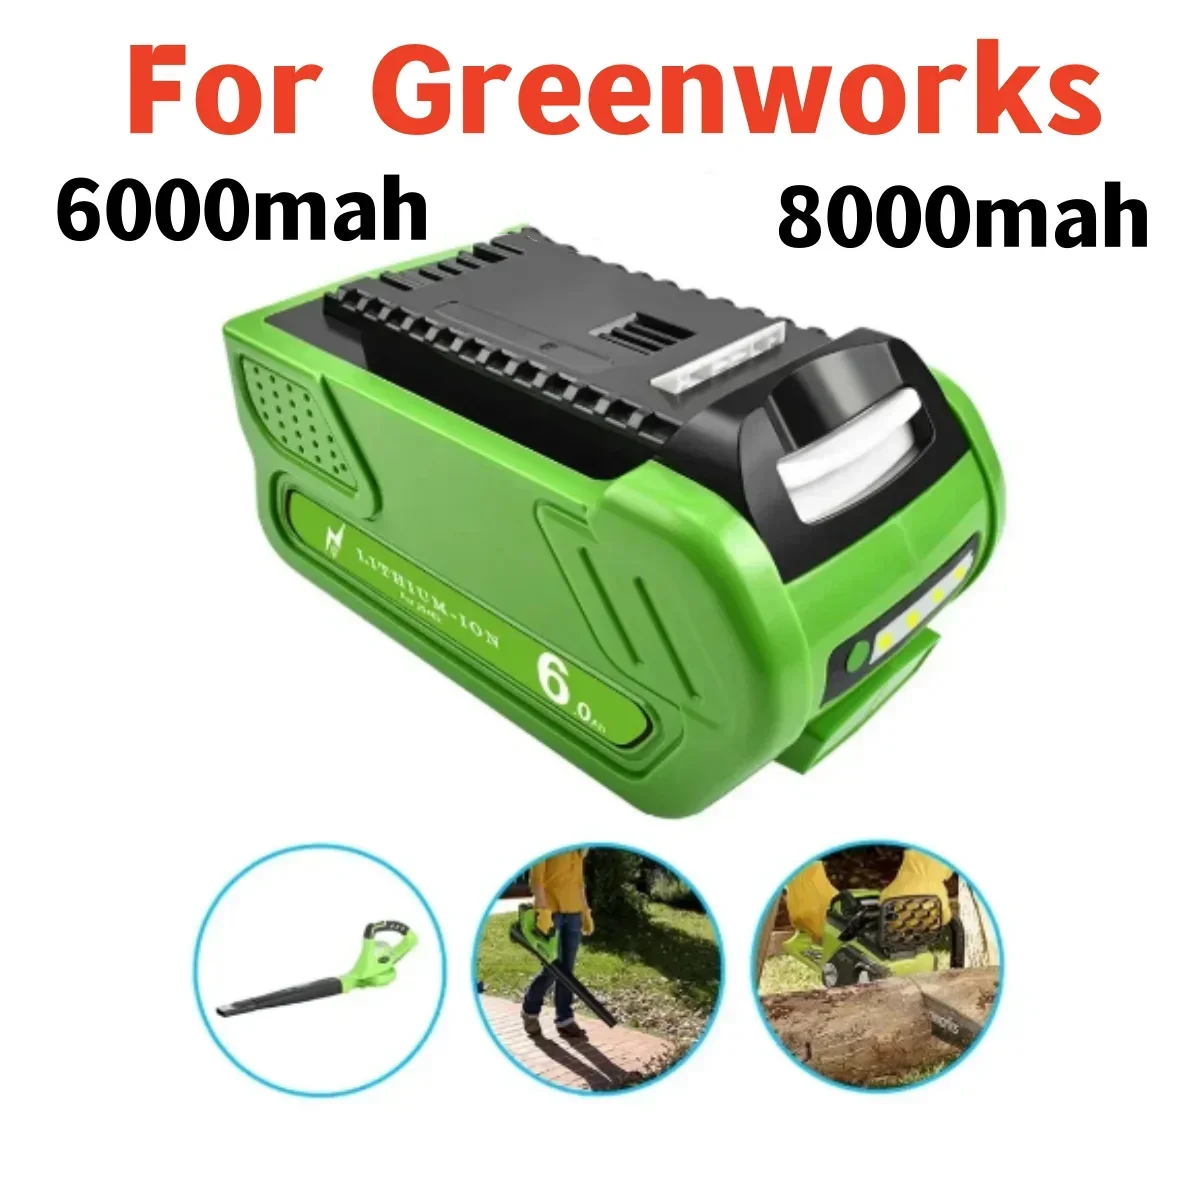 

40v 6.0/8.0Ah Battery For Greenworks 29462 29472 29282 G-MAX GMAX Lawn Mower Power Tools Li-ion Rechargeable Battery